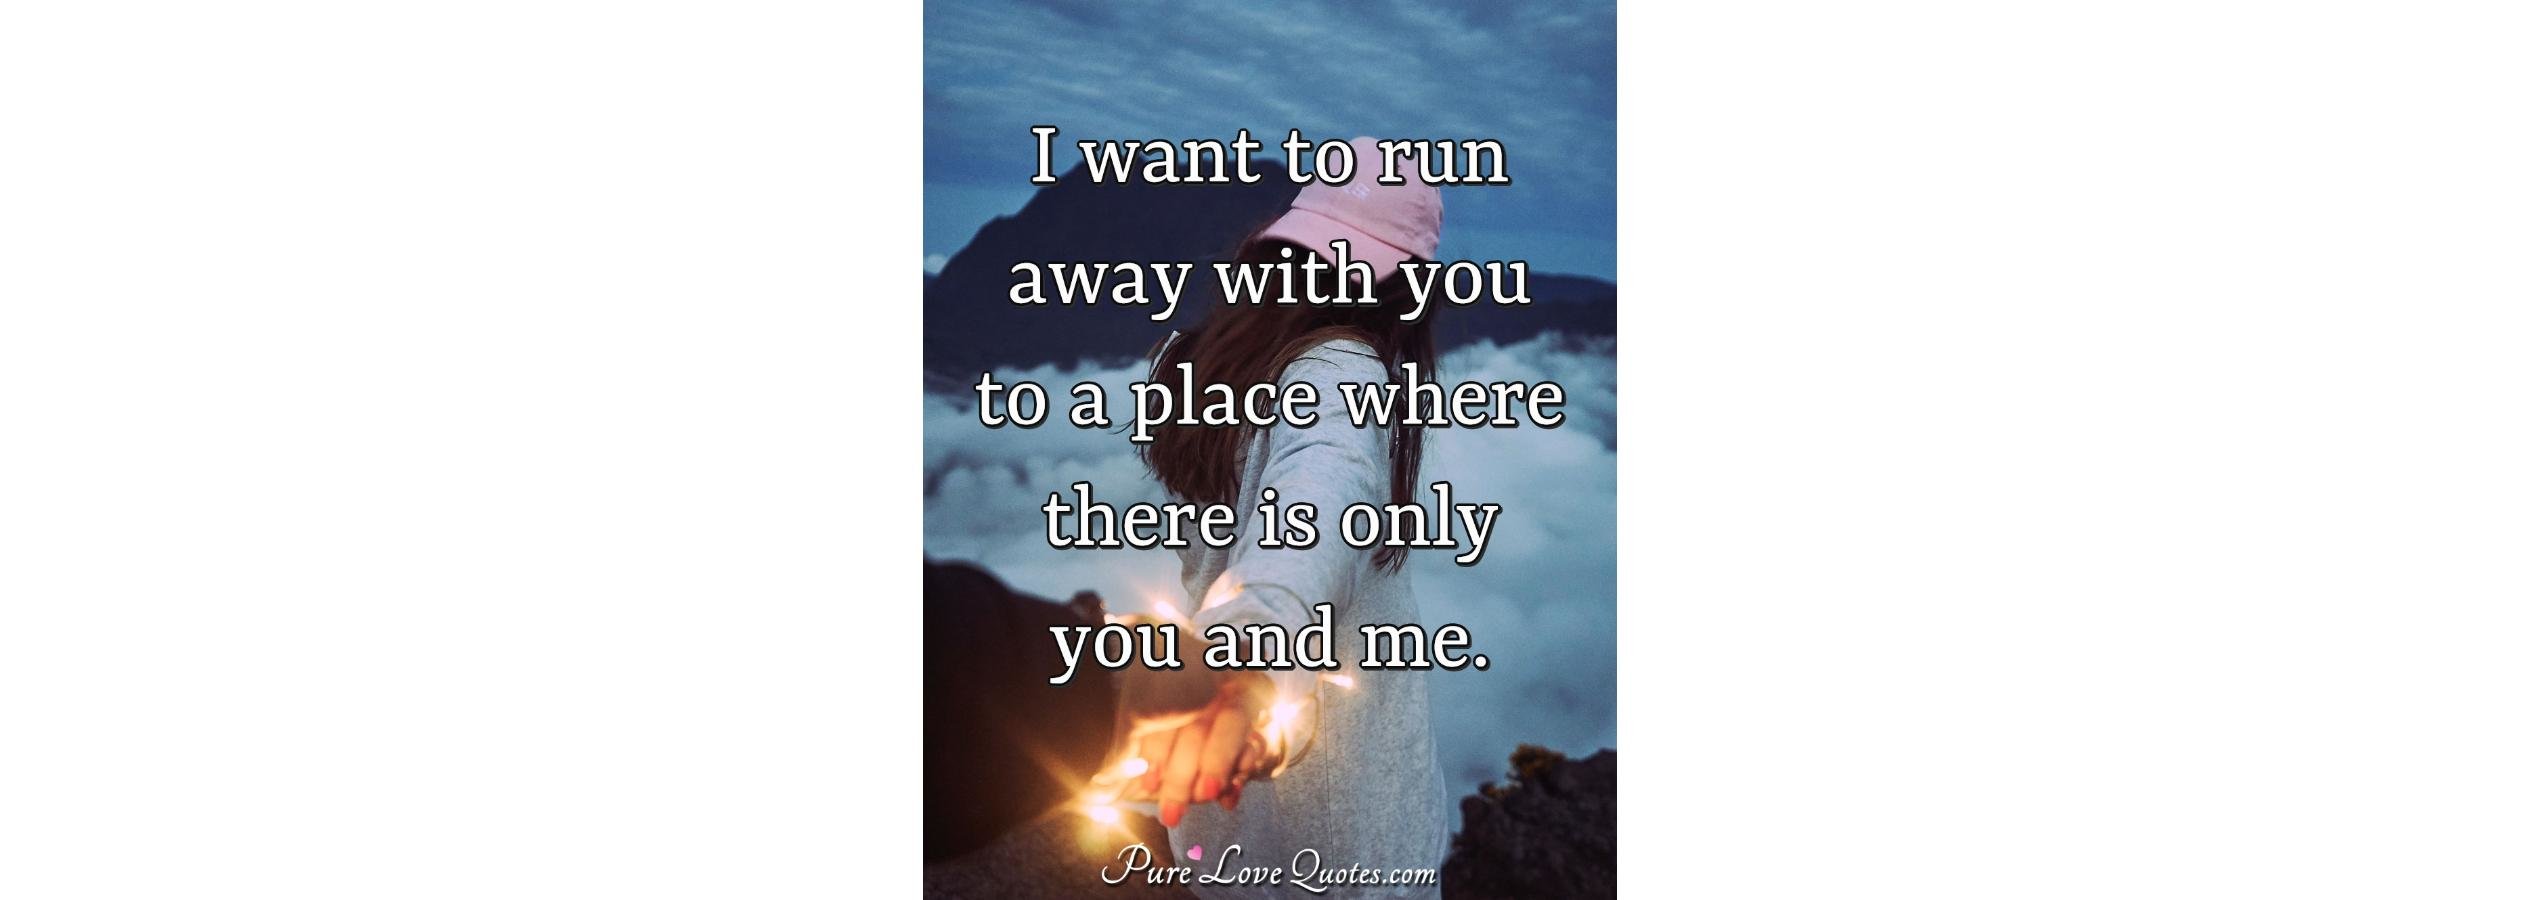 I want to run away with you to a place where there is only you and me